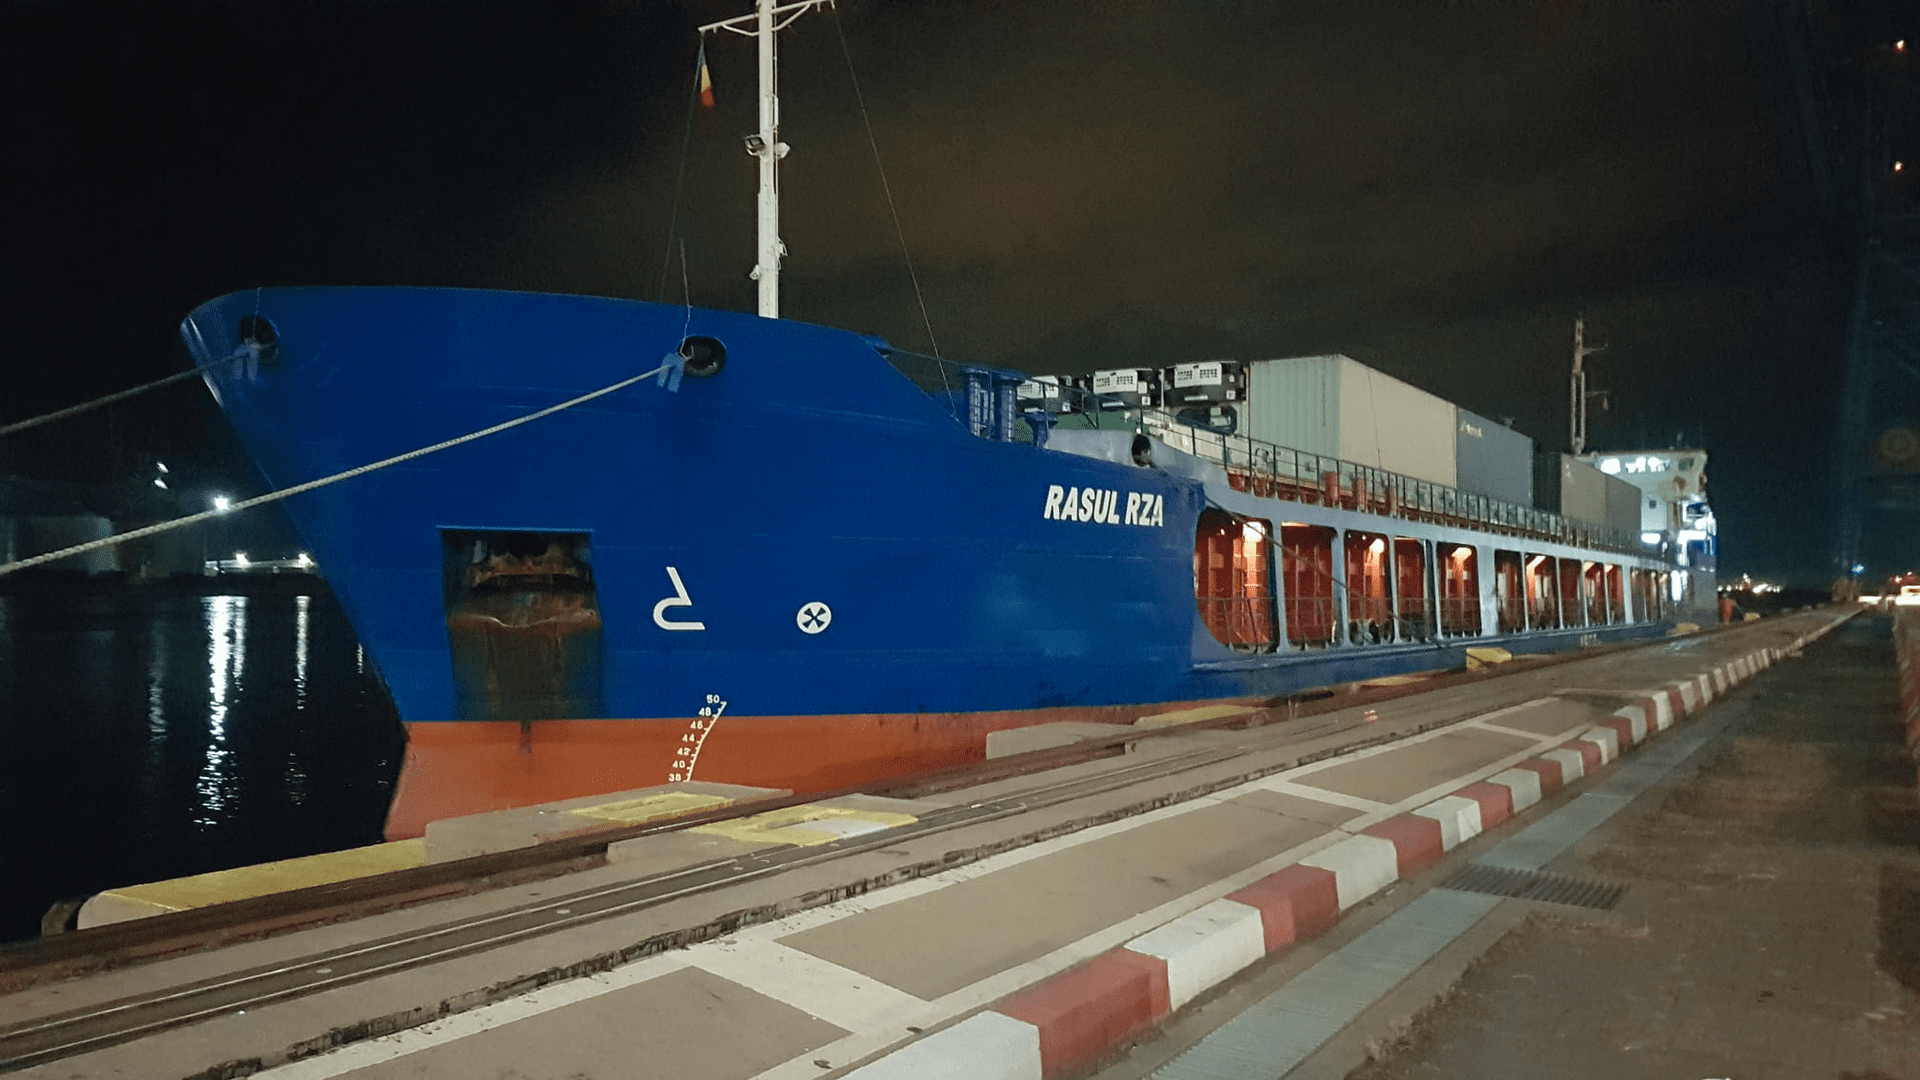 ADY Container delivers cargo from Central Asia to Europe